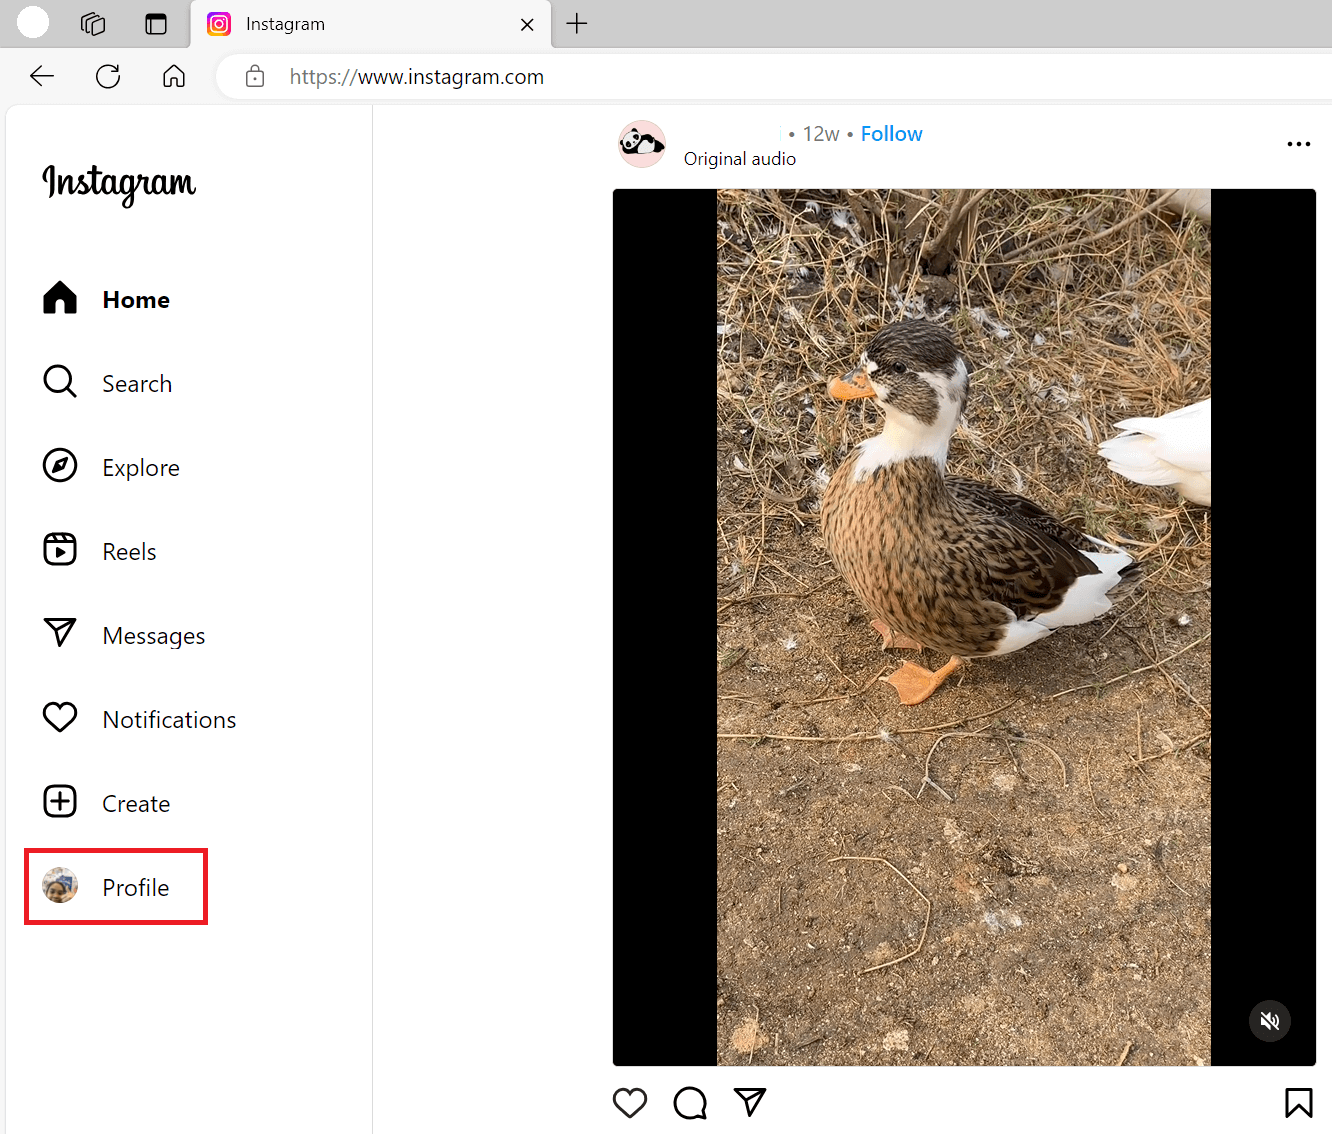 "Profile" option highlighted in Instagram for Web.